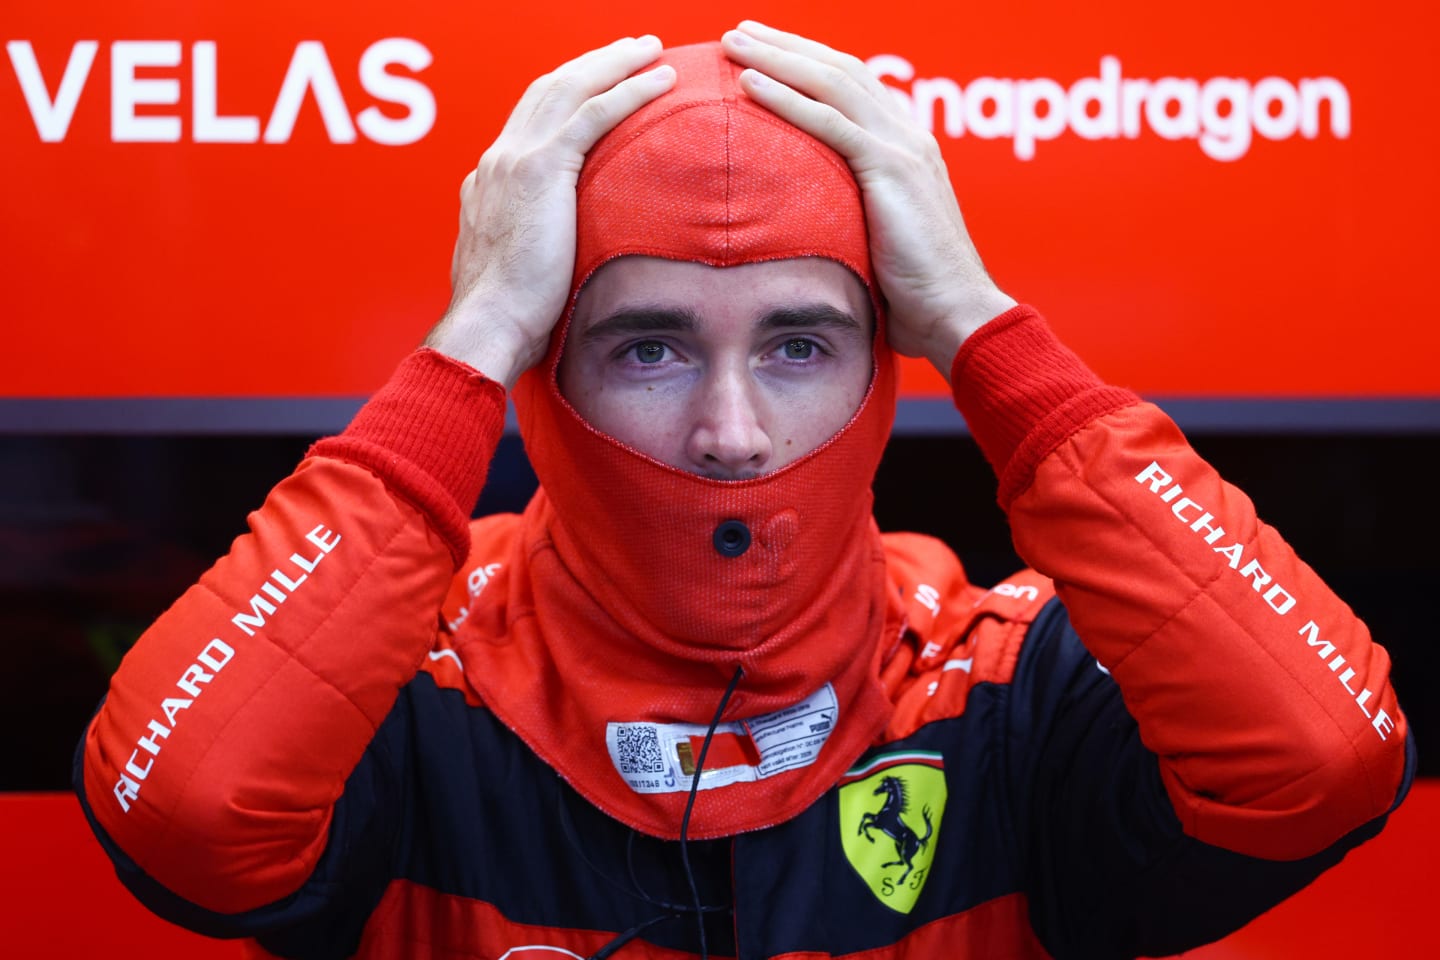 SINGAPORE, SINGAPORE - SEPTEMBER 30: Charles Leclerc of Monaco and Ferrari prepares to drive in the